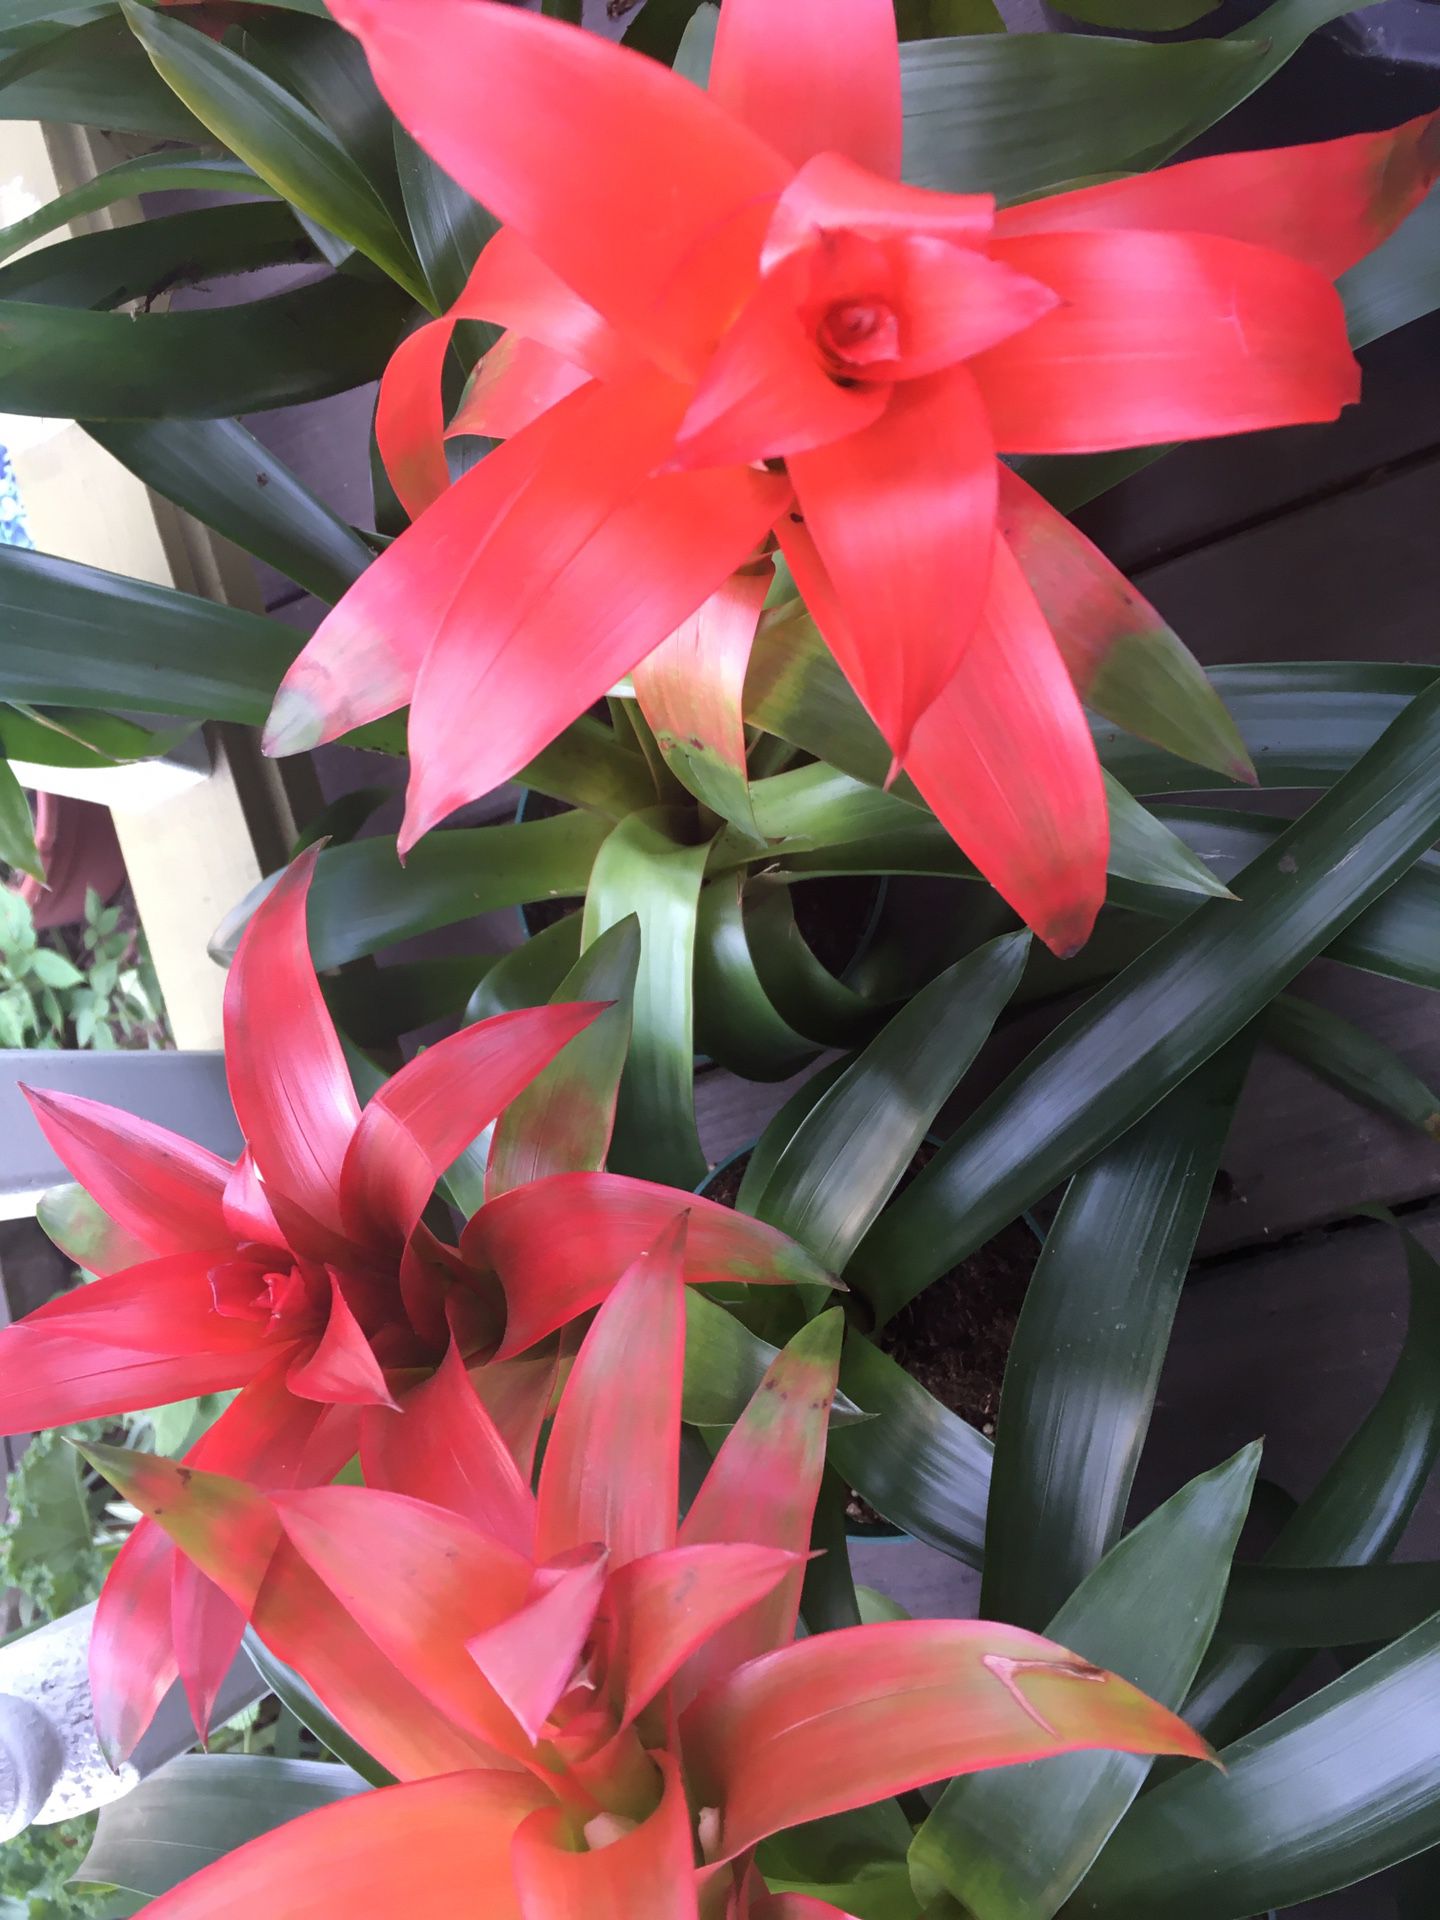 Discounted! Red flowering Bromeliads great foliage leaf potted plants 12”-18” tall